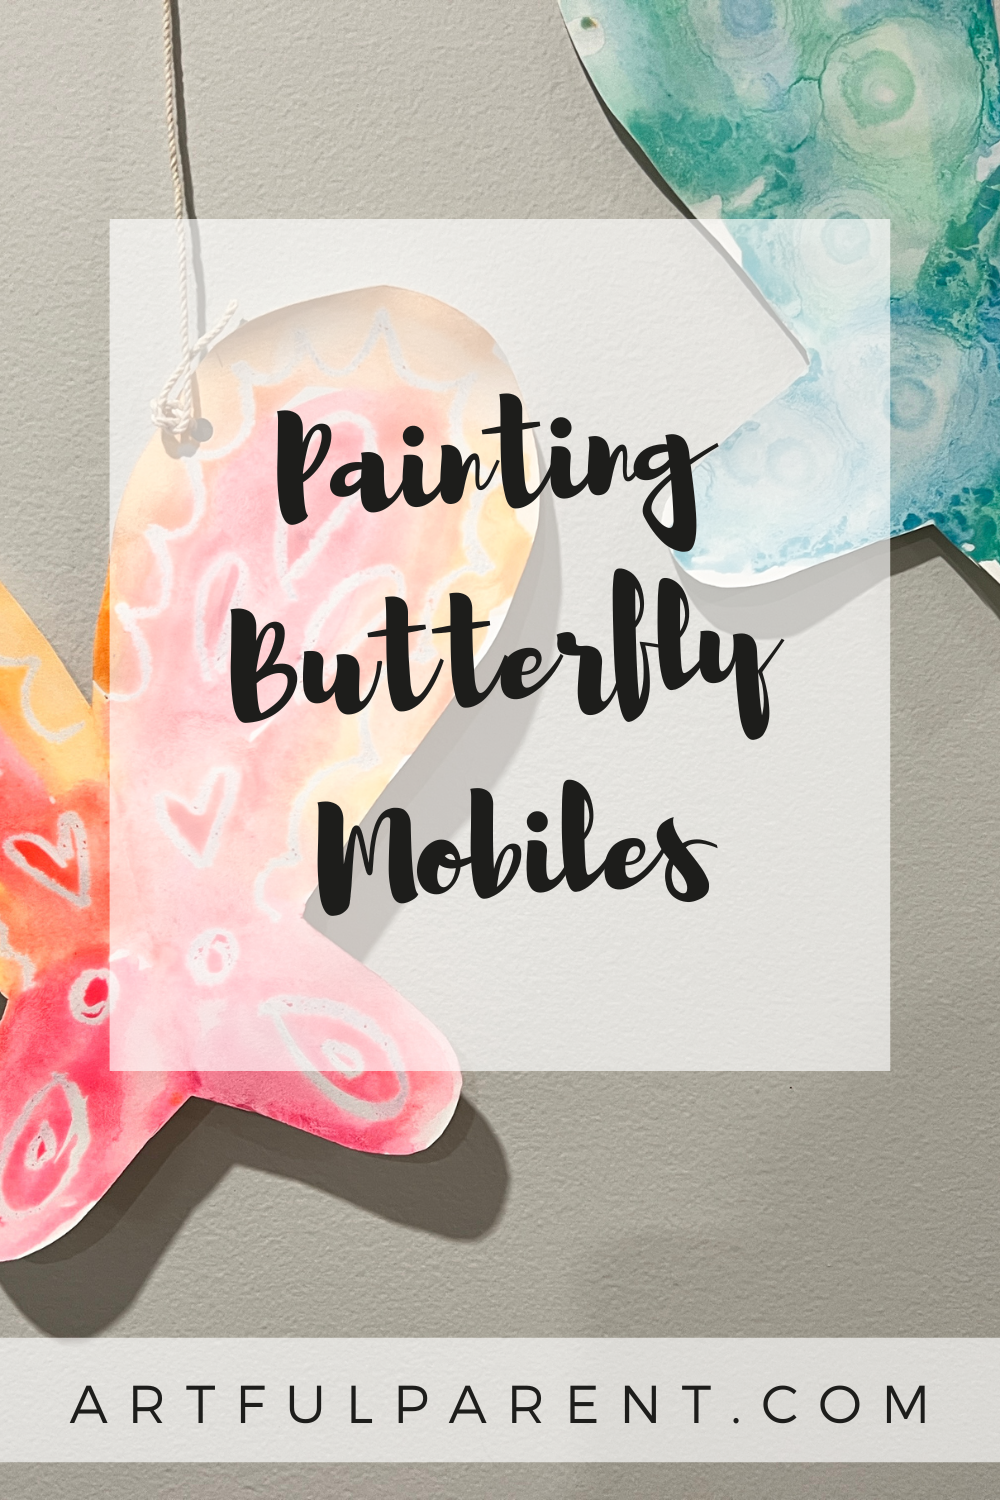 Painting Butterfly Mobiles with Watercolors